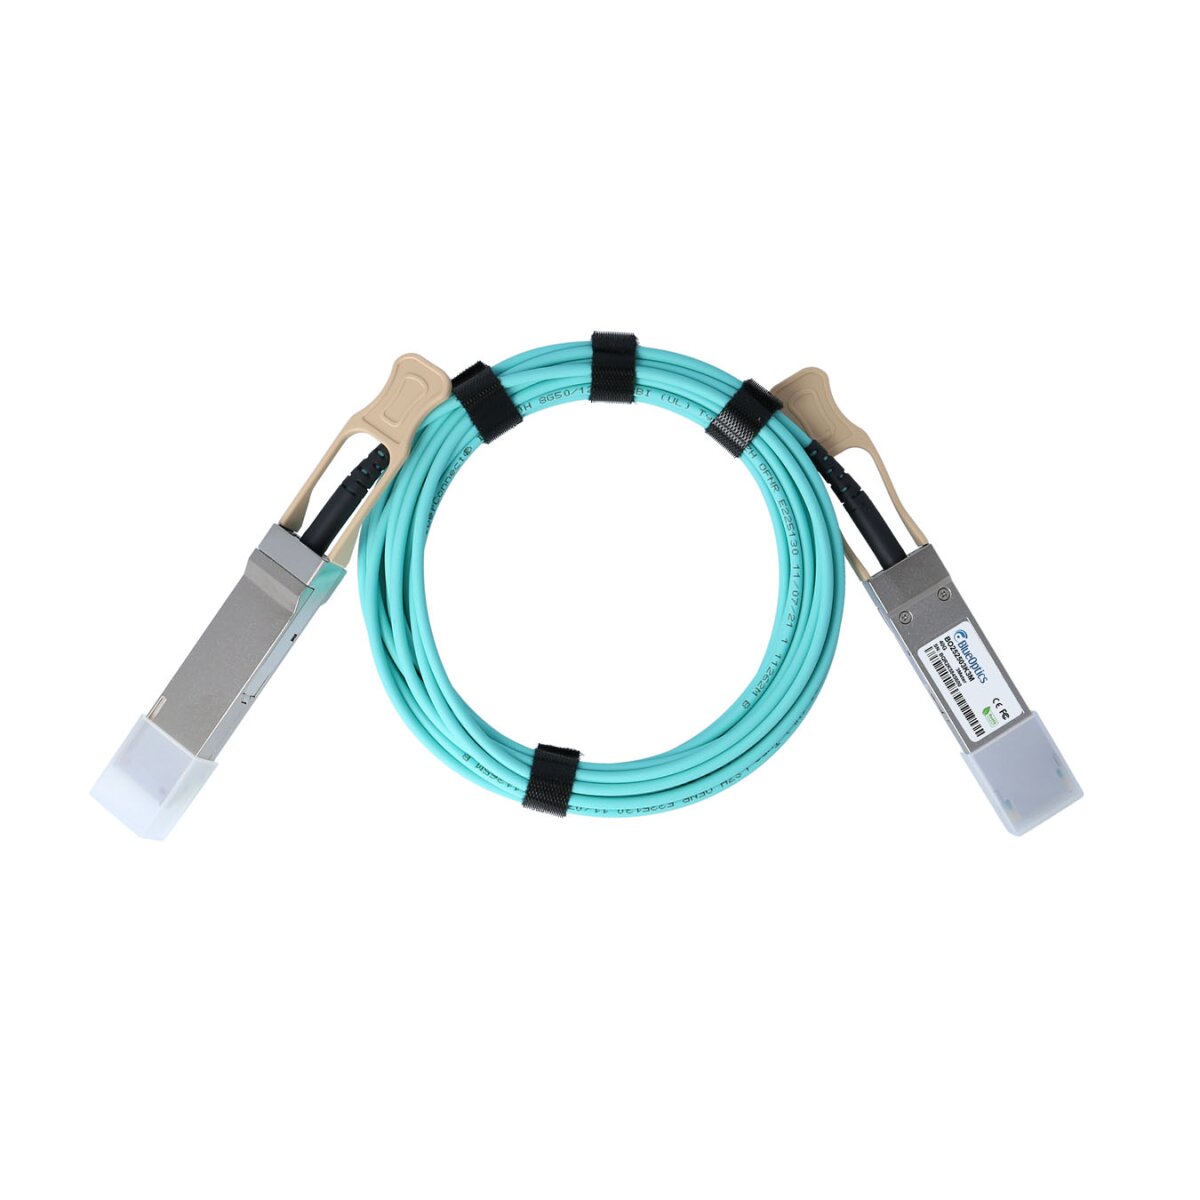 in online IT shop the Cheap cables OCTO & AG adapters